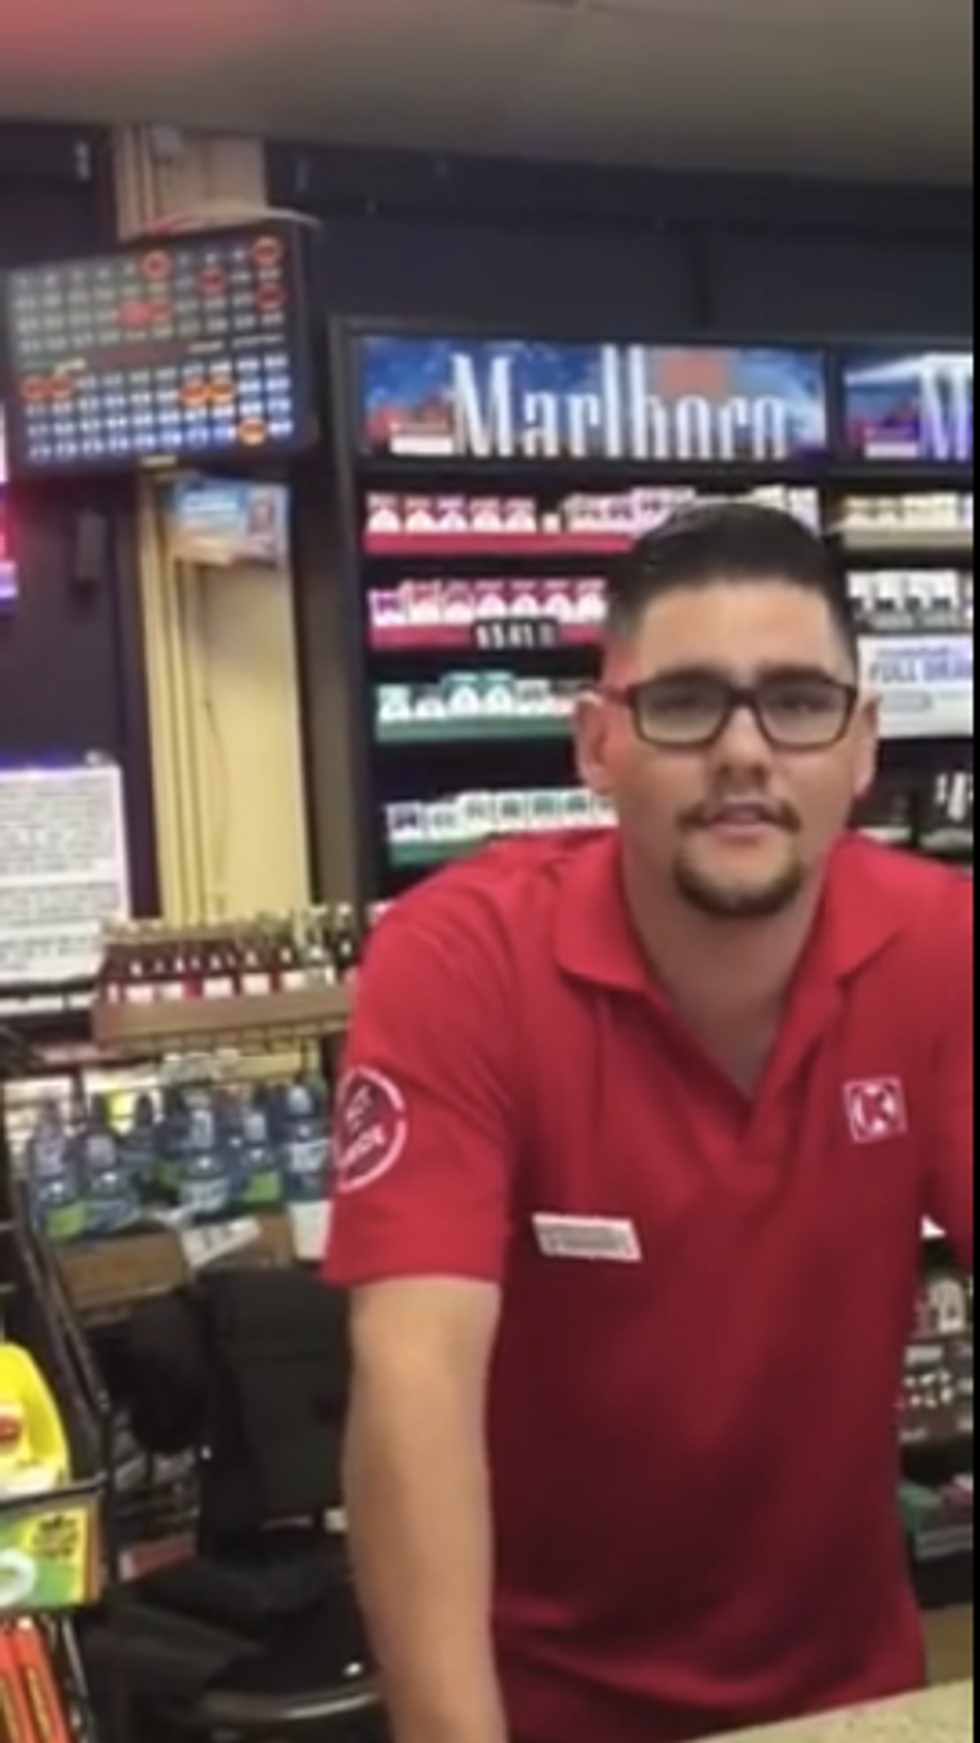 ‘You’re a Liar’: U.S. Marine Overhears Clerk Talking About His ‘Deployment’ and Is Unable to Remain Silent  